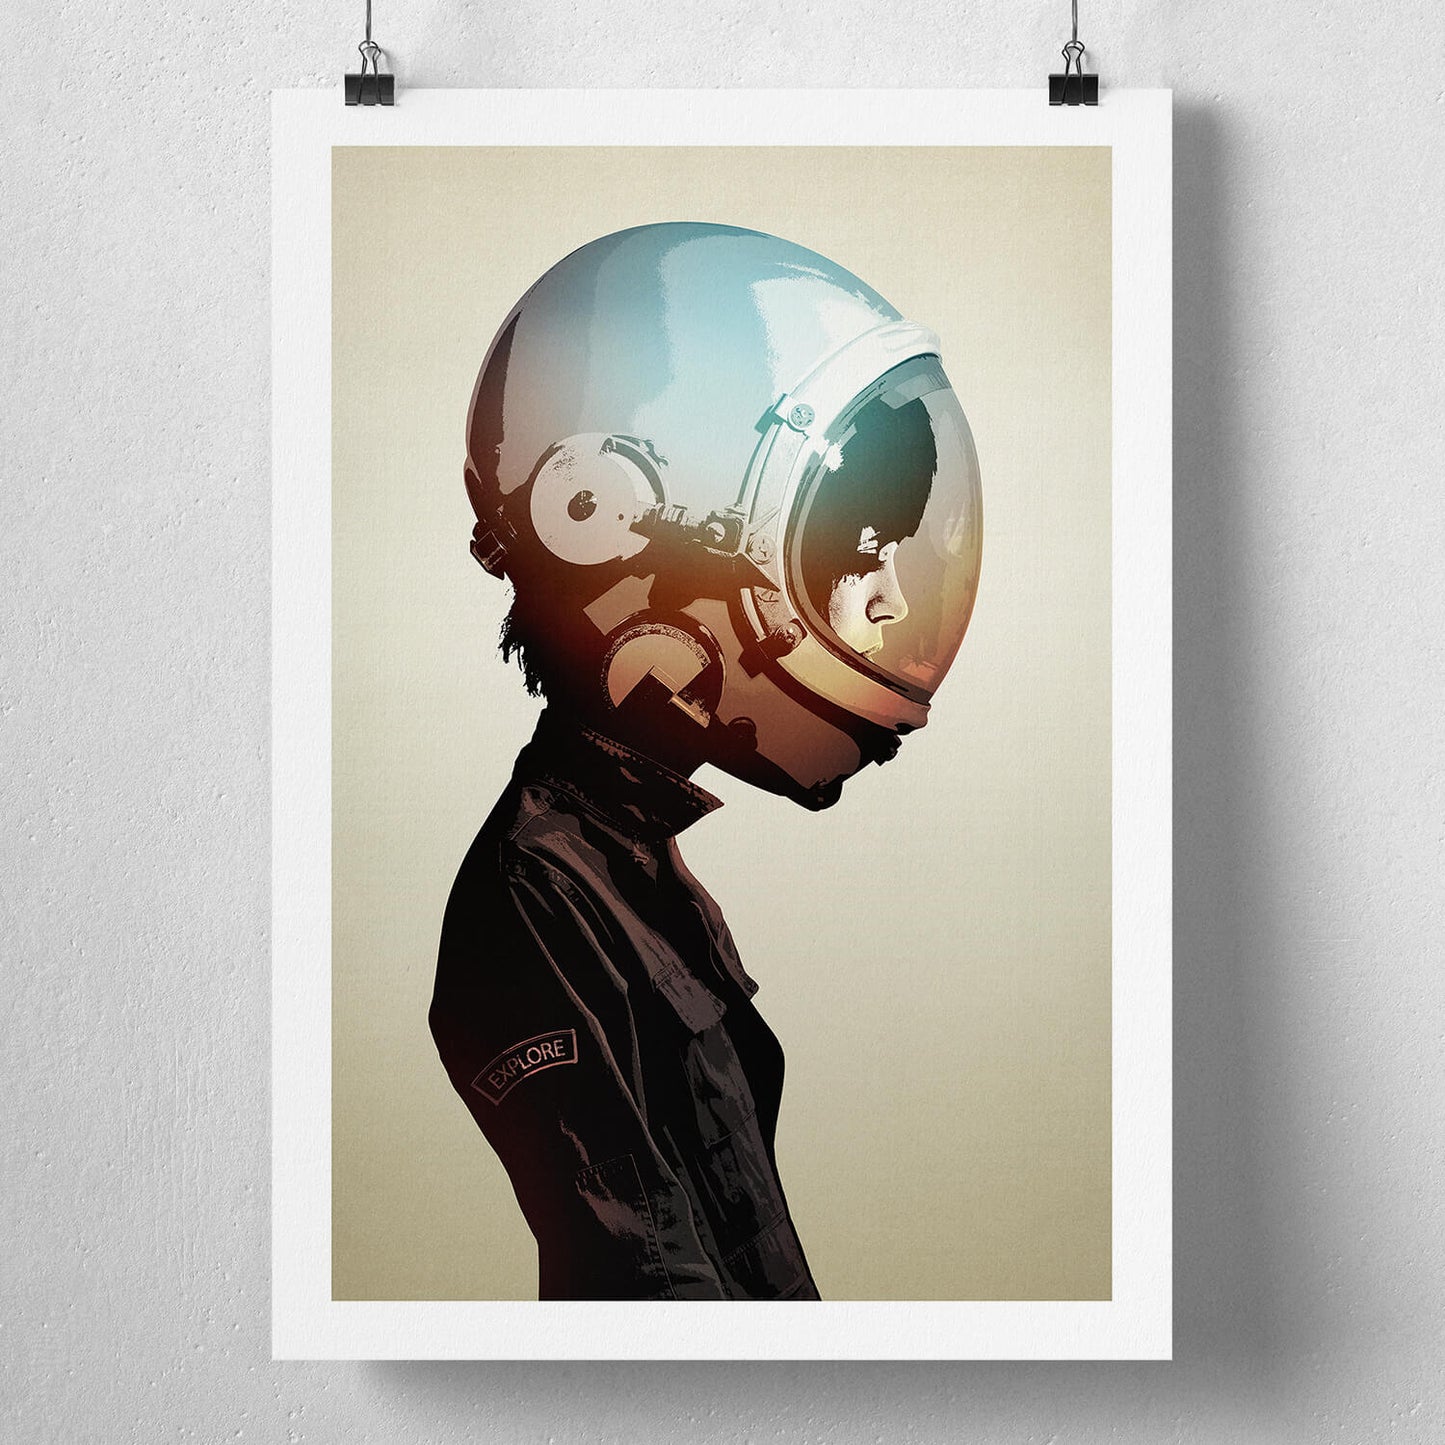  Space Cadet Signed Print from Hidden Moves